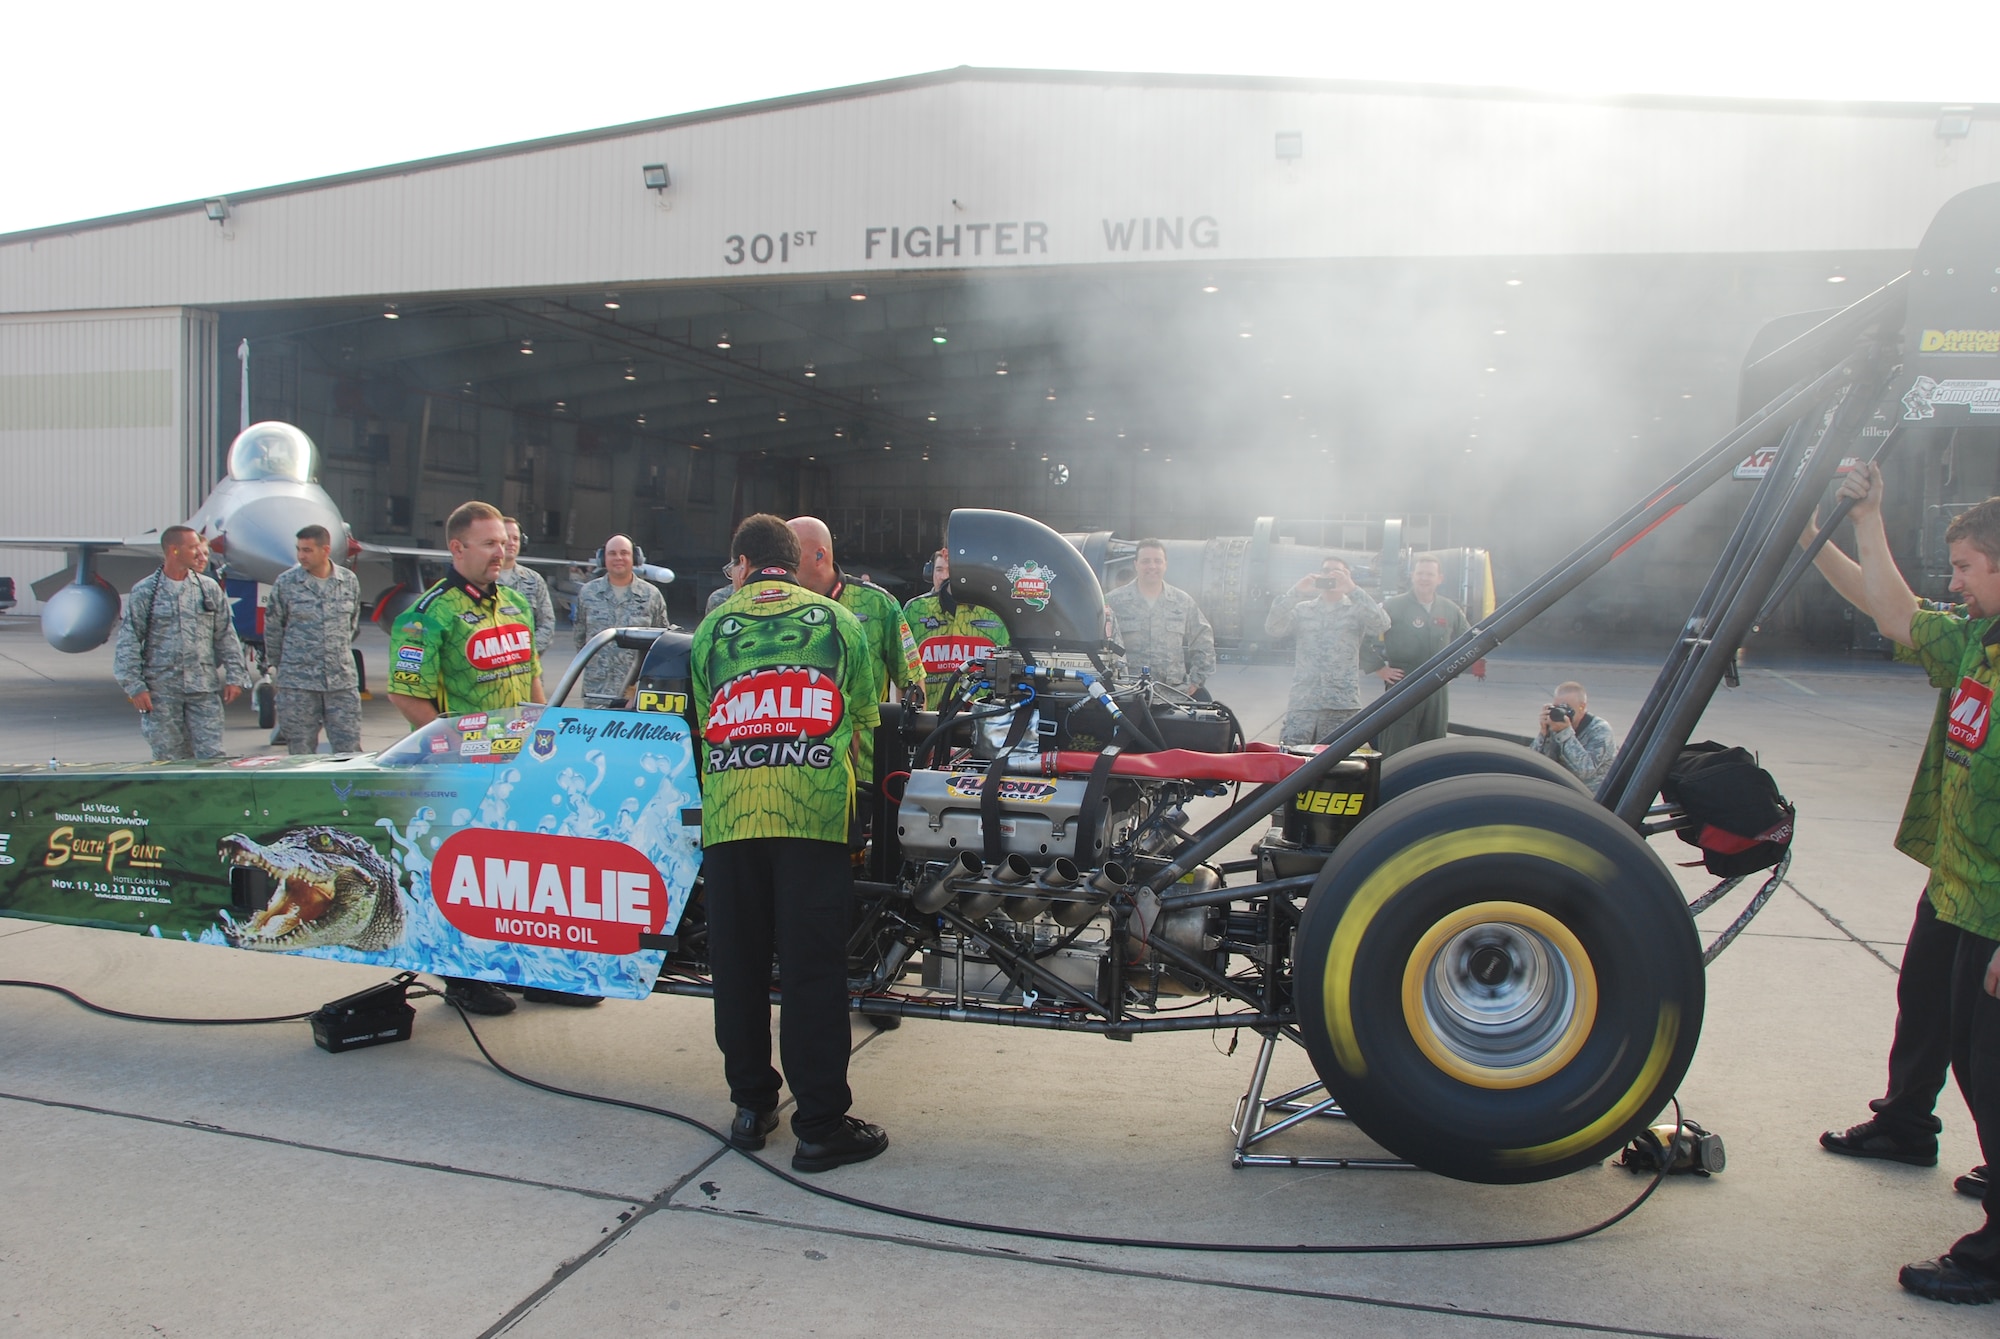 Mr. Terry McMillen, driver of the Amalie Oil Top Fuel dragster, fires up his car.  McMillen and his crew recently visited the 301st Fighter Wing before racing at a Dallas-area event. (Air Force Photo/Tech. Sgt. Shawn McCowan)